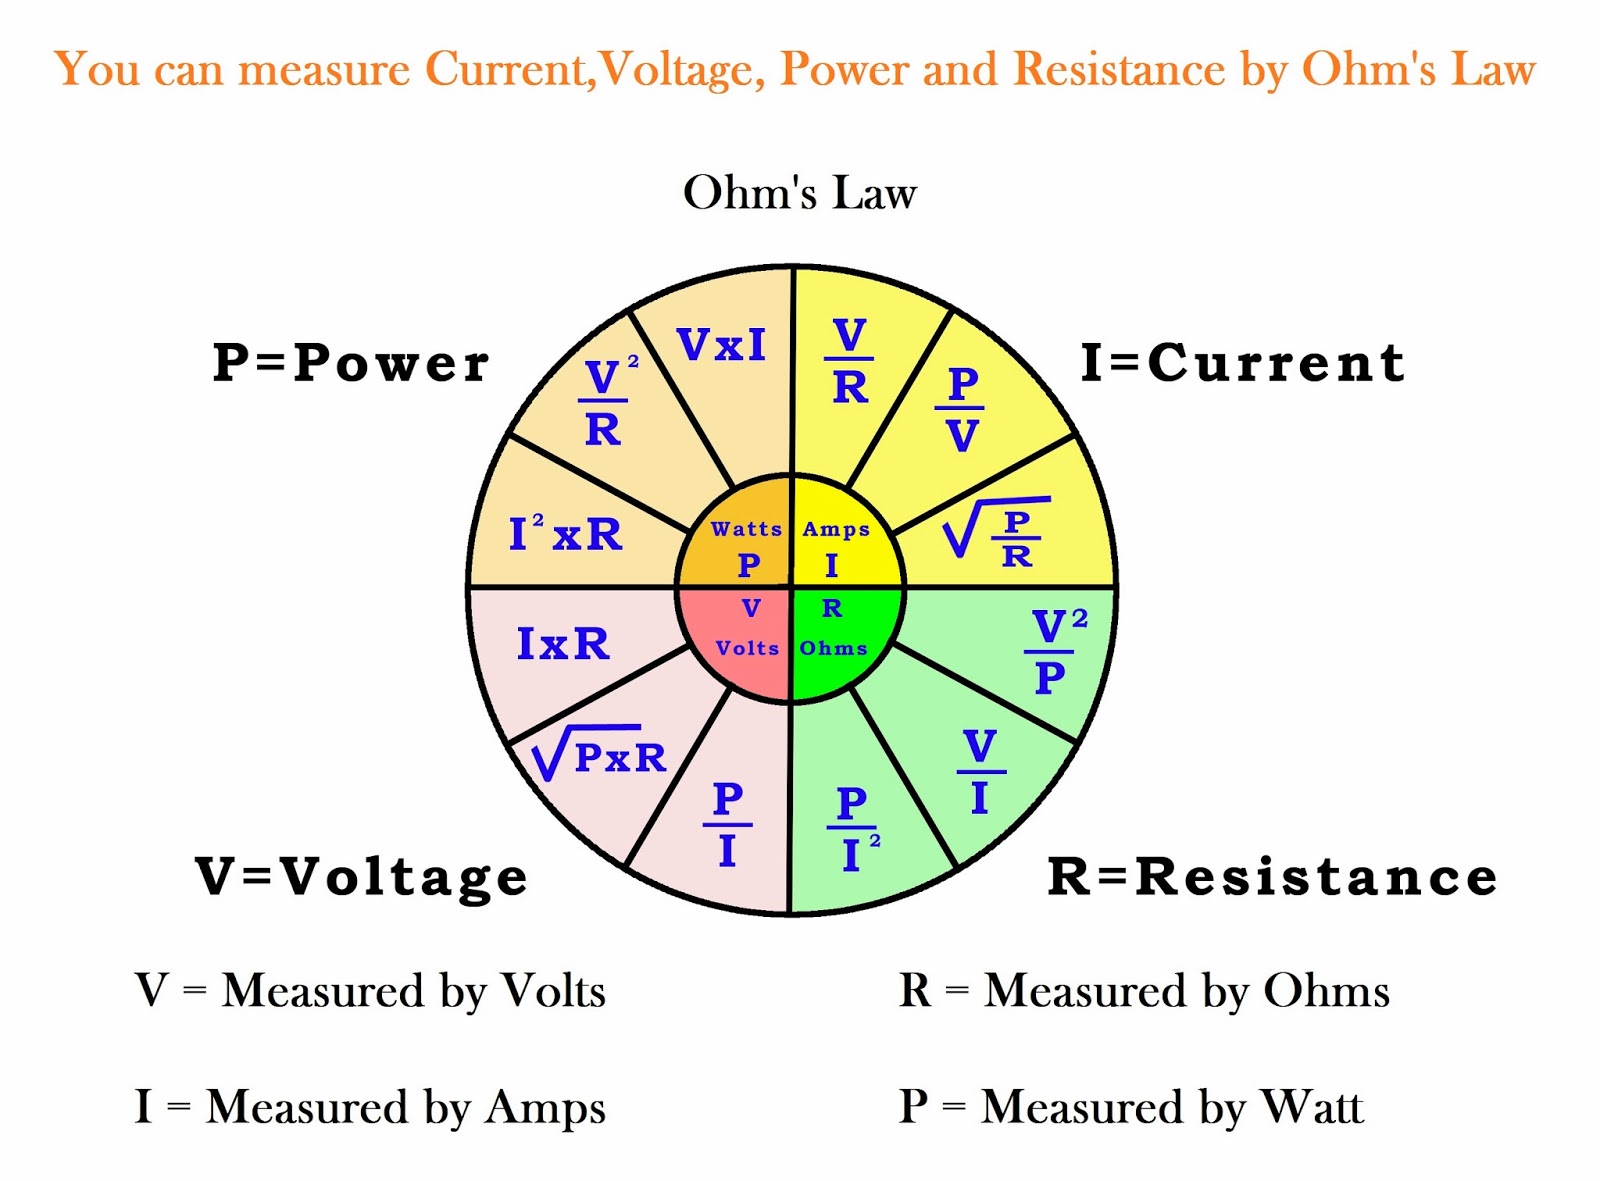 Electrical & Electronic Engineering: Ohm's Law, Current Voltage